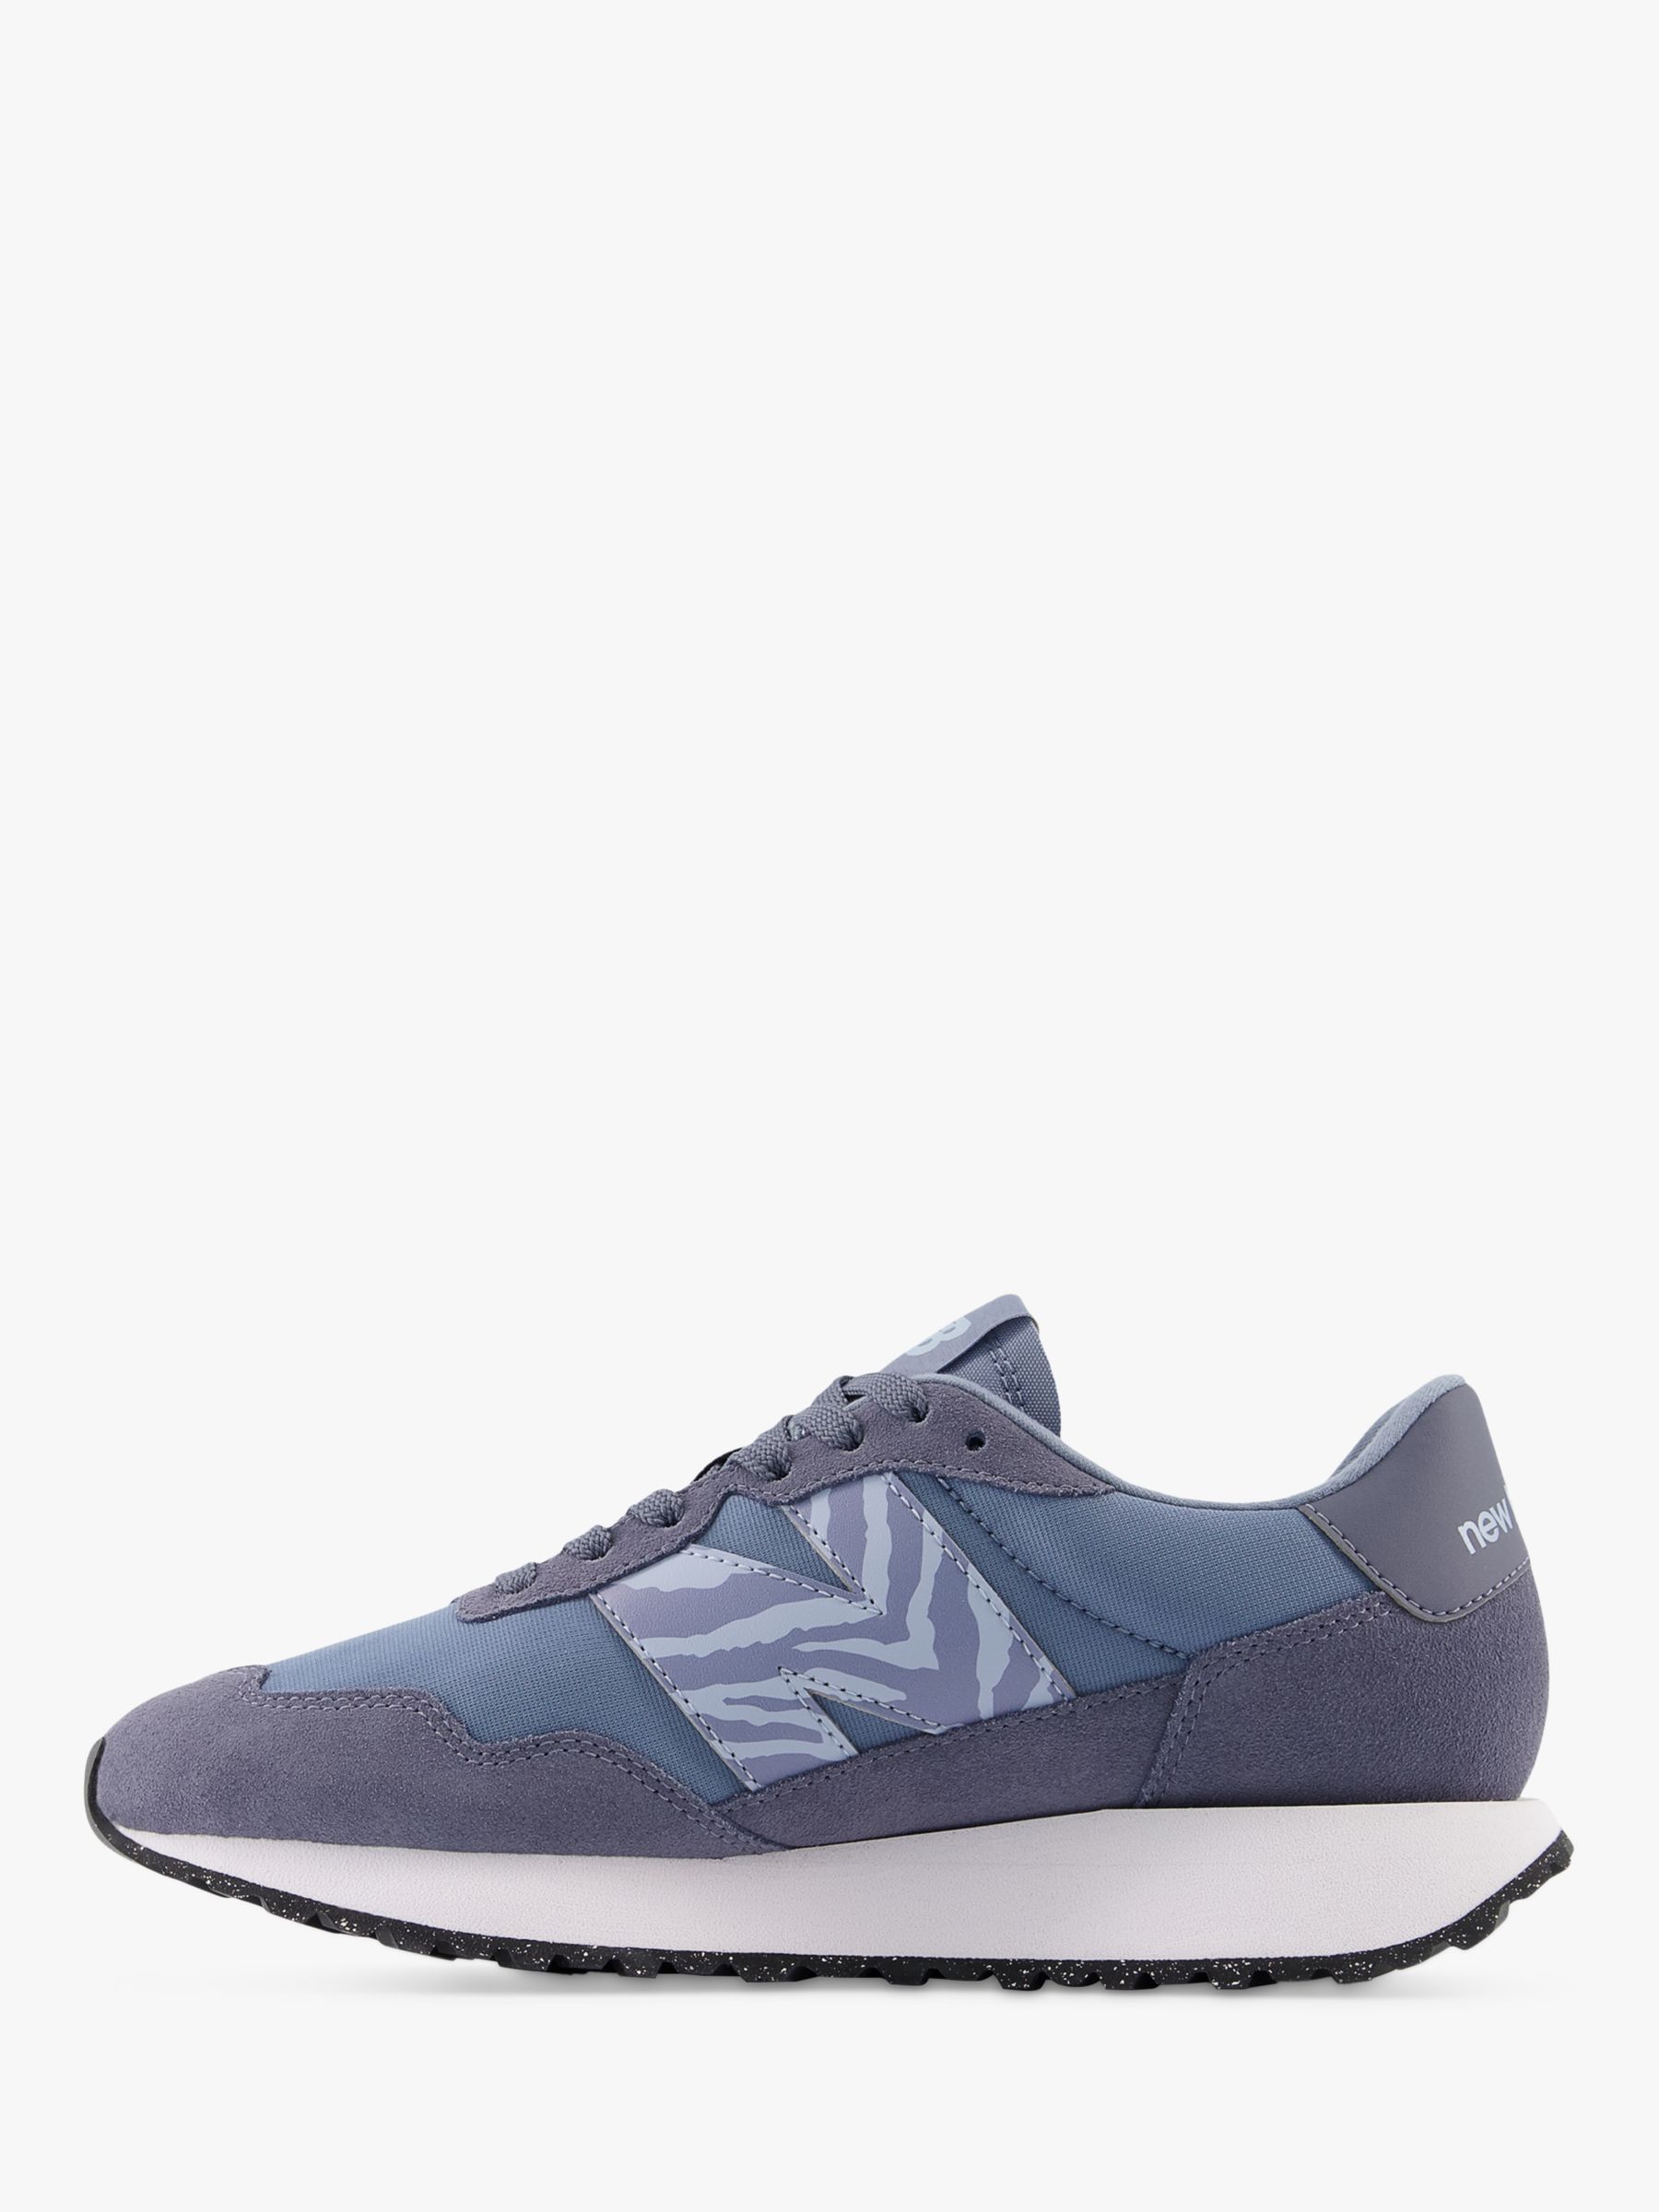 Buy New Balance 237 Suede Mesh Trainers Online at johnlewis.com